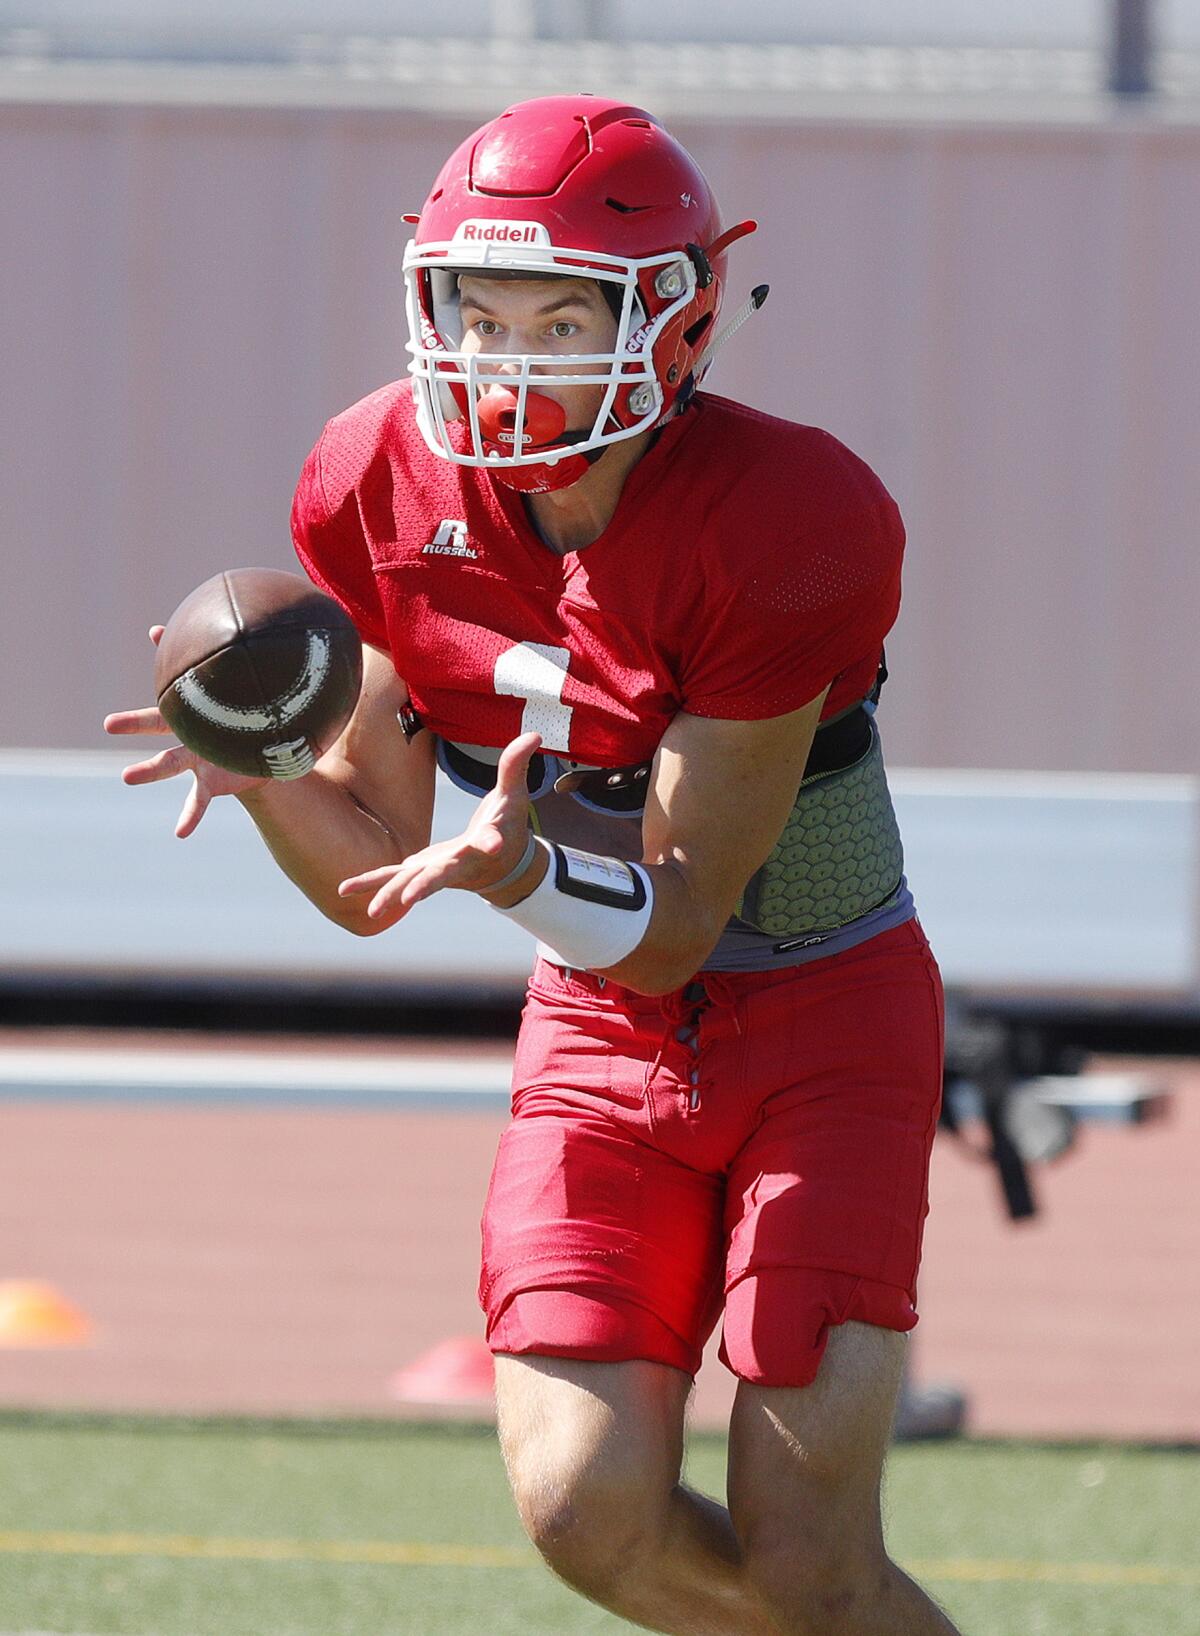 Burroughs' Aiden Forrester brings in a catch during a drill at football practice at Burroughs High School in Burbank on Tuesday, August 13, 2019.